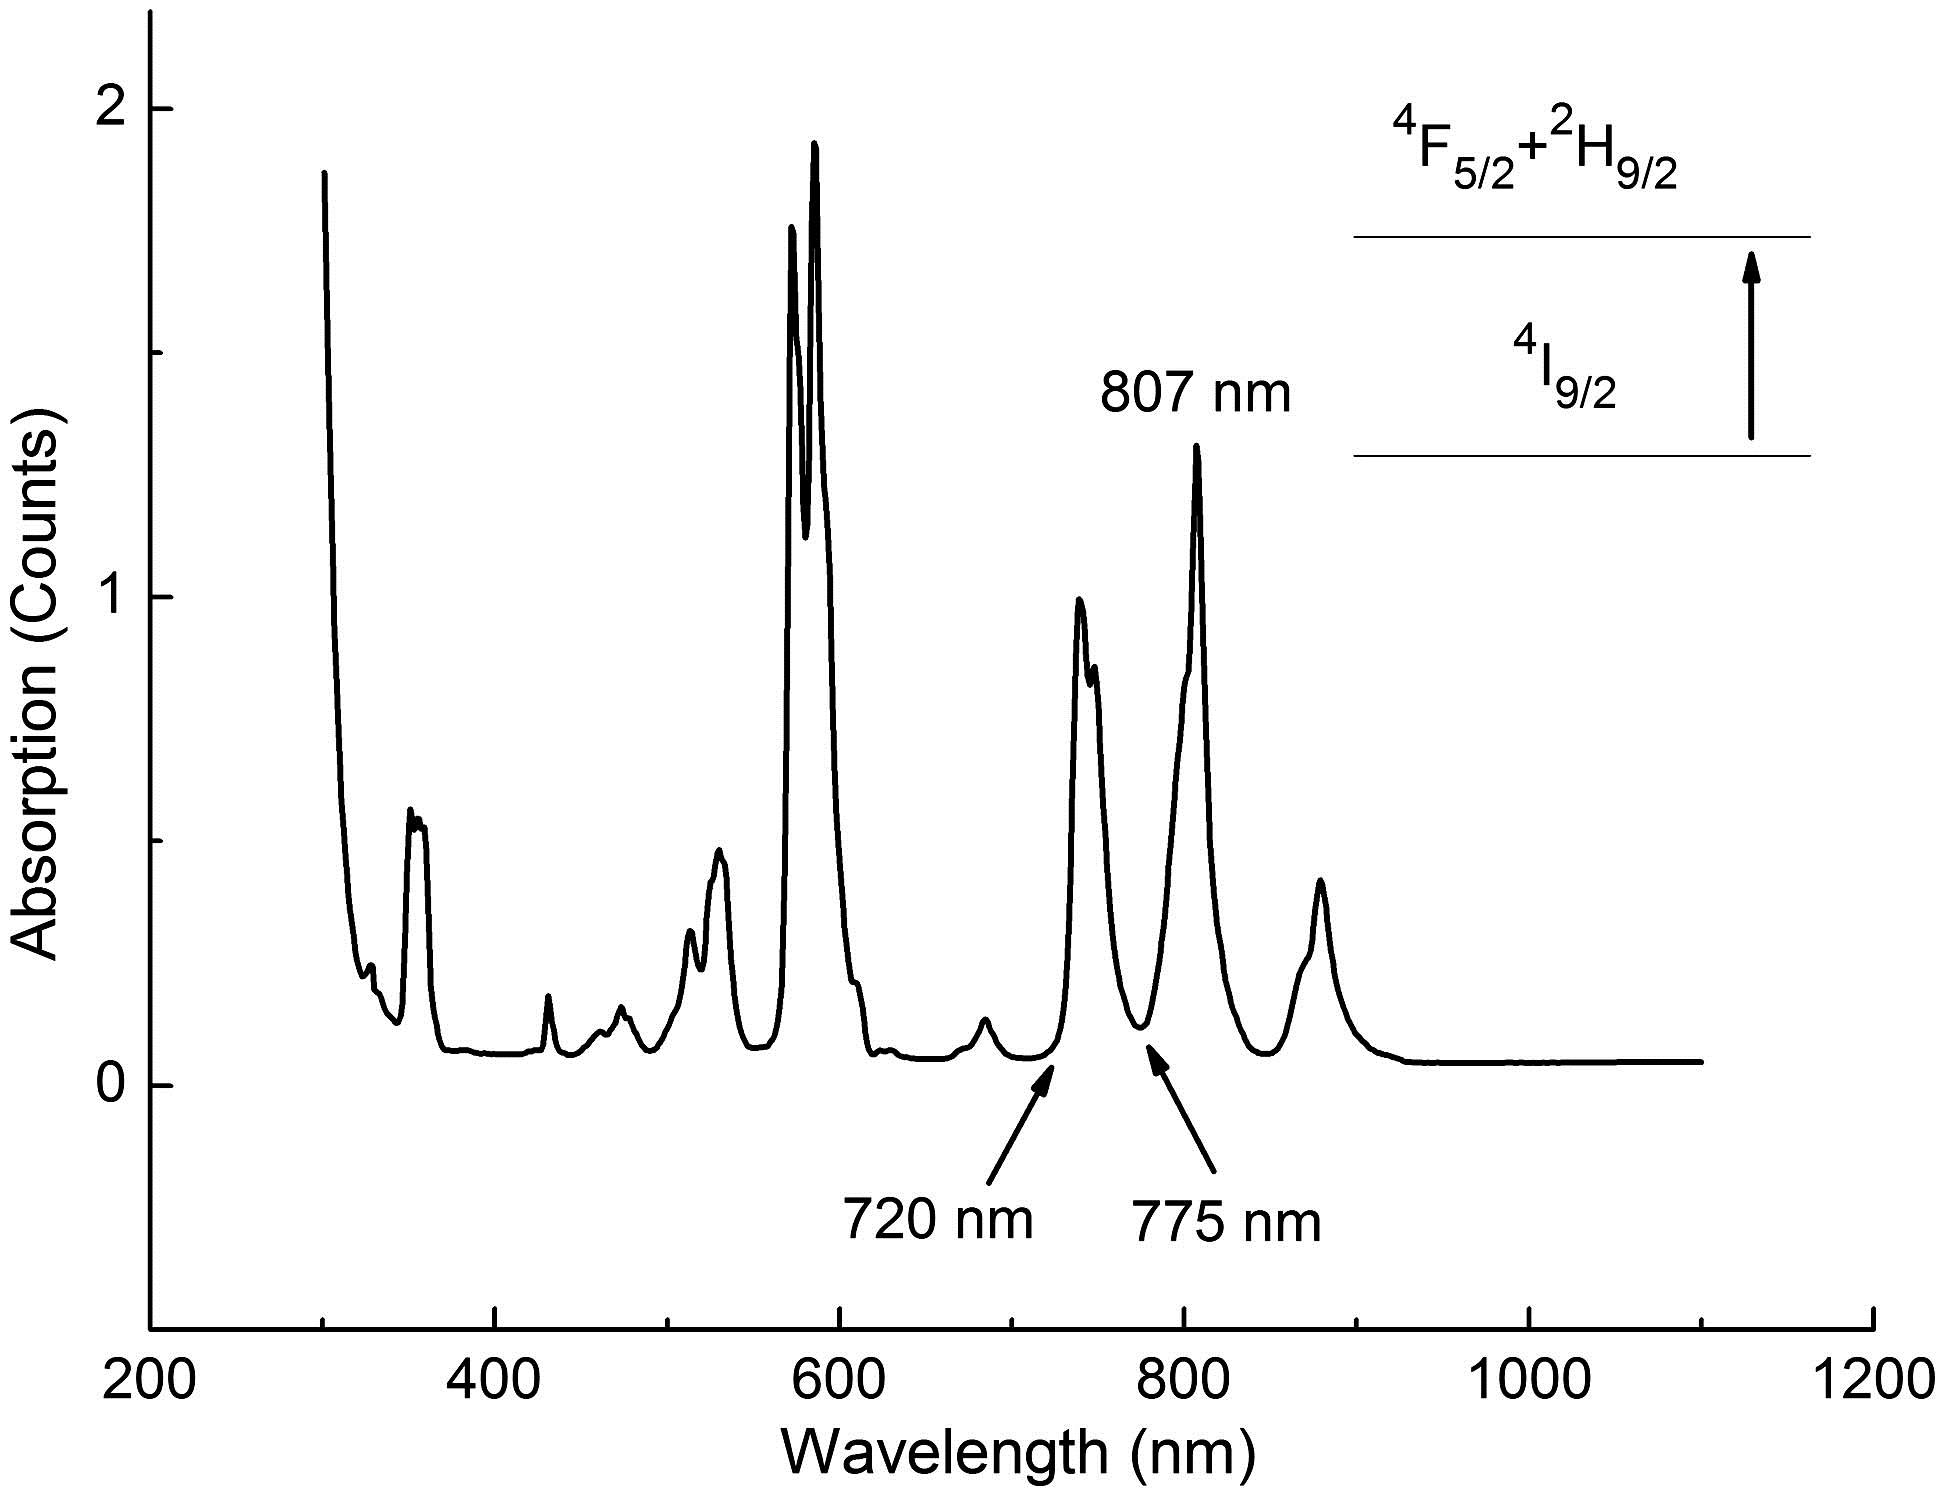 Absorption spectrum of Pr–Nd glass. Resonant wavelength is 807 nm, whose absorption rate is 1.311. Nonresonant wavelengths are 775 and 720 nm, whose absorption rates are 0.118 and 0.066, respectively.